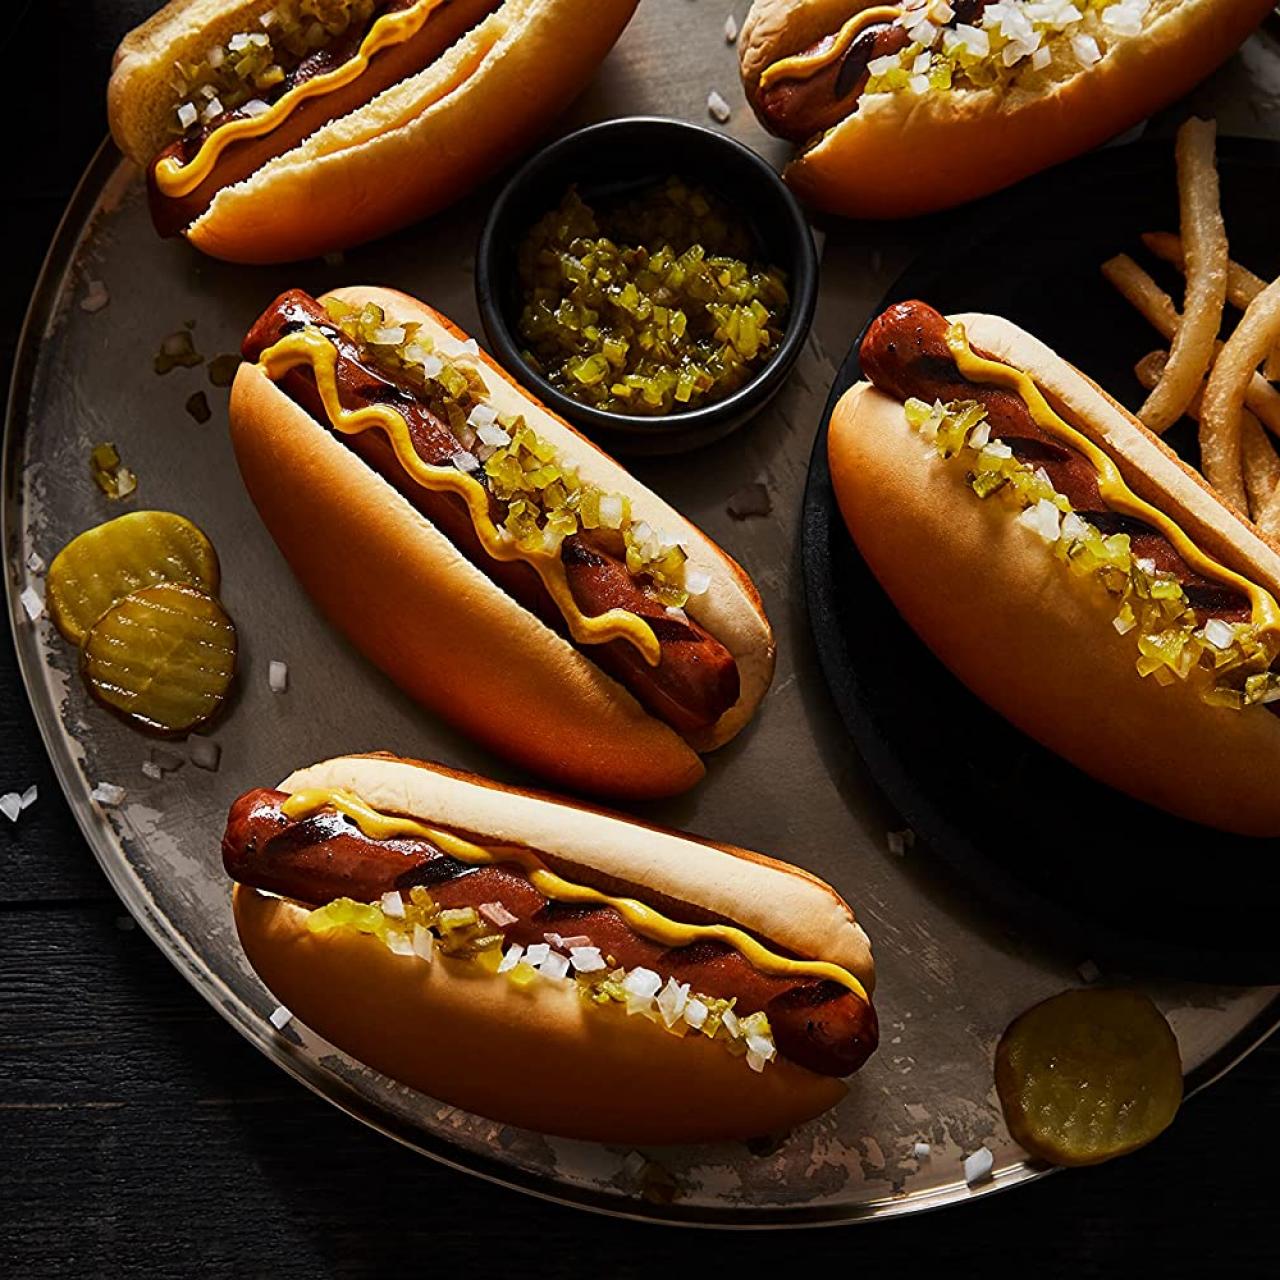 Bite into Our Hot Dogs -- Beef, Pork, Turkey, Chicken, and More